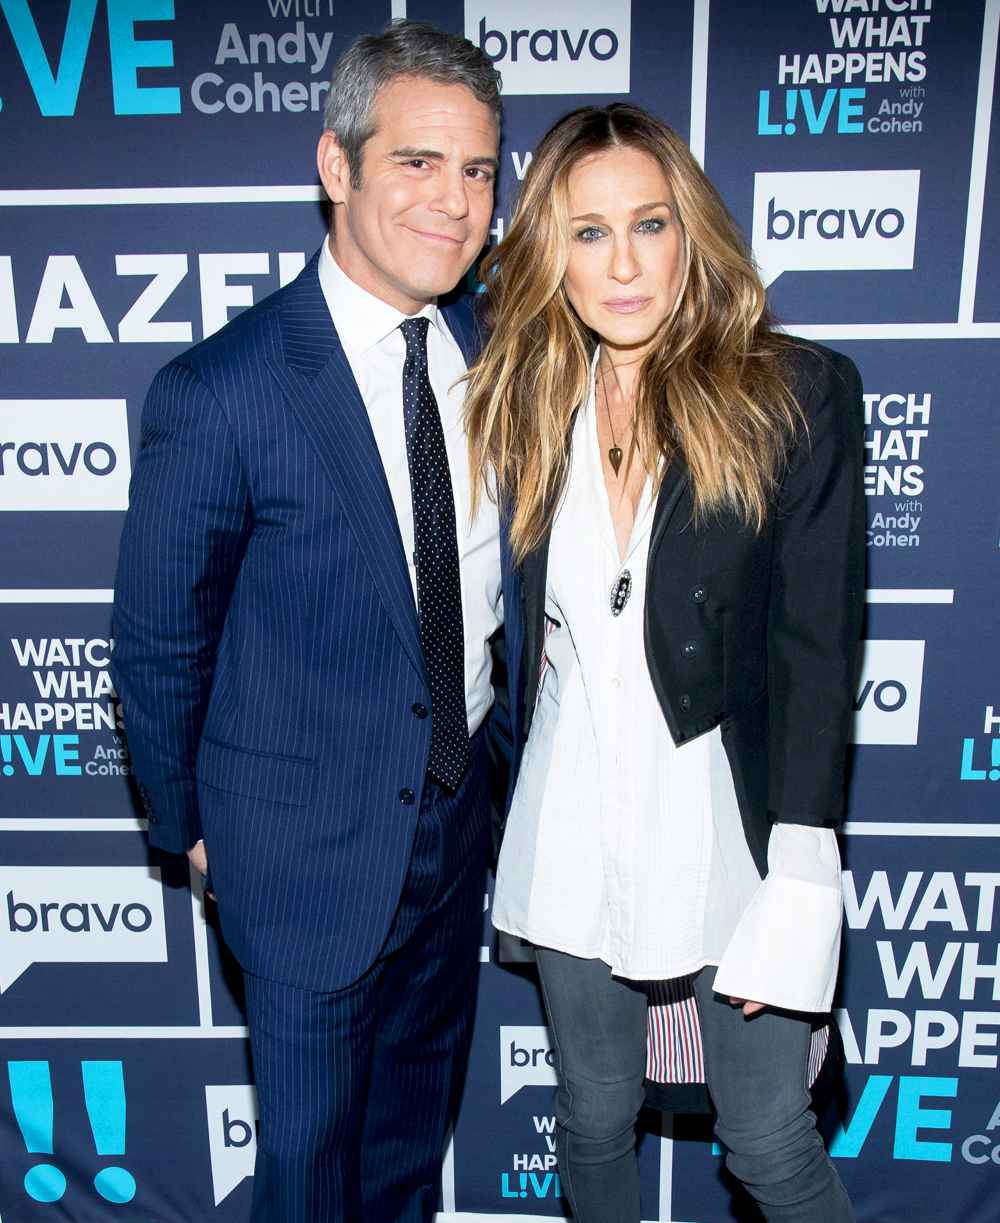 Andy Cohen and Sarah Jessica Parker on ‘Watch What Happens Live‘